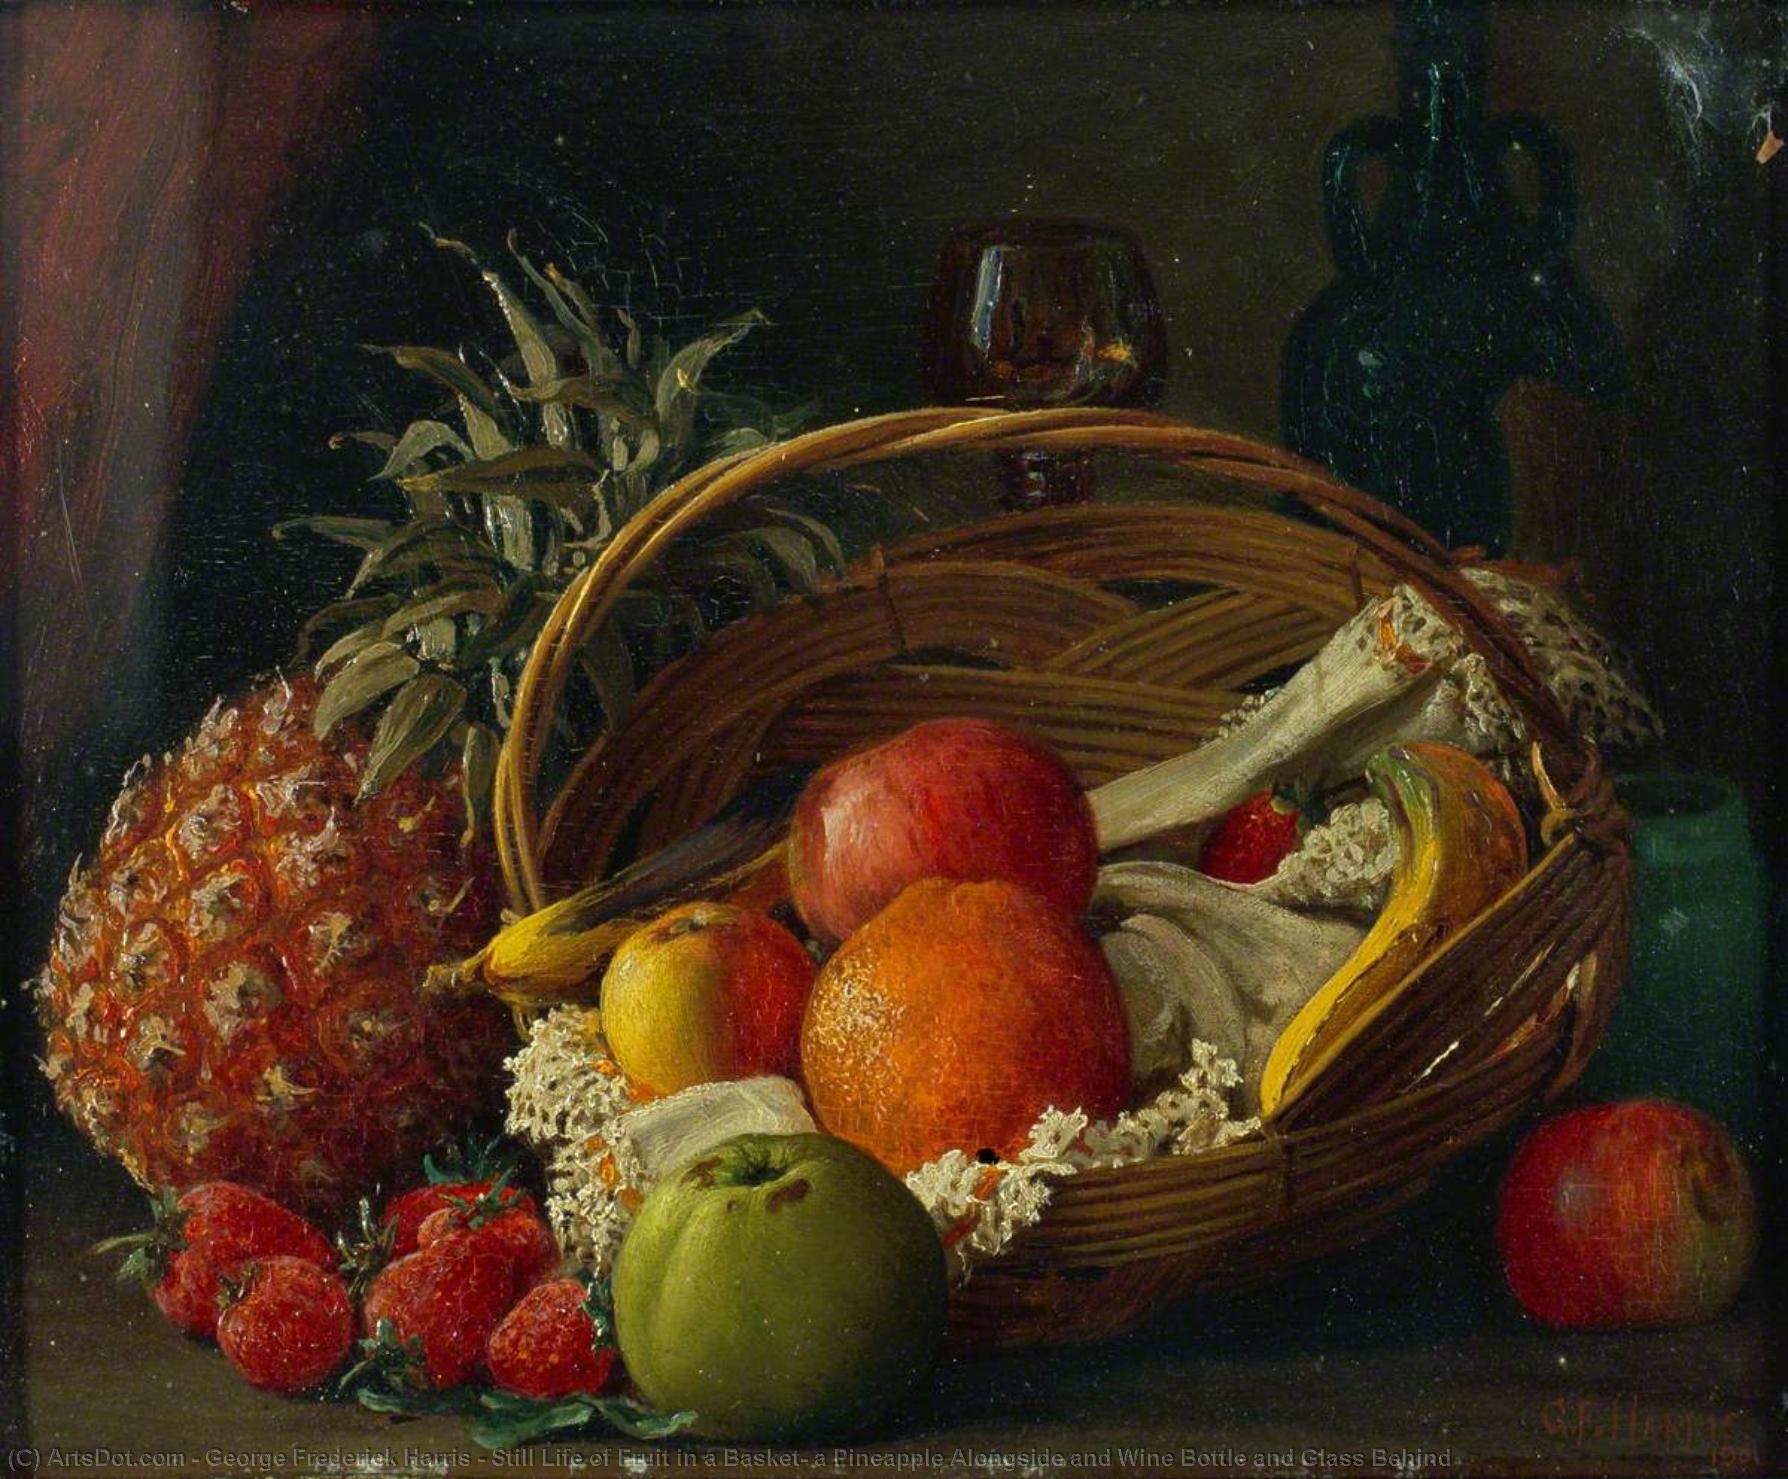 Order Oil Painting Replica Still Life of Fruit in a Basket, a Pineapple Alongside and Wine Bottle and Glass Behind, 1901 by George Frederick Harris (1856-1924) | ArtsDot.com